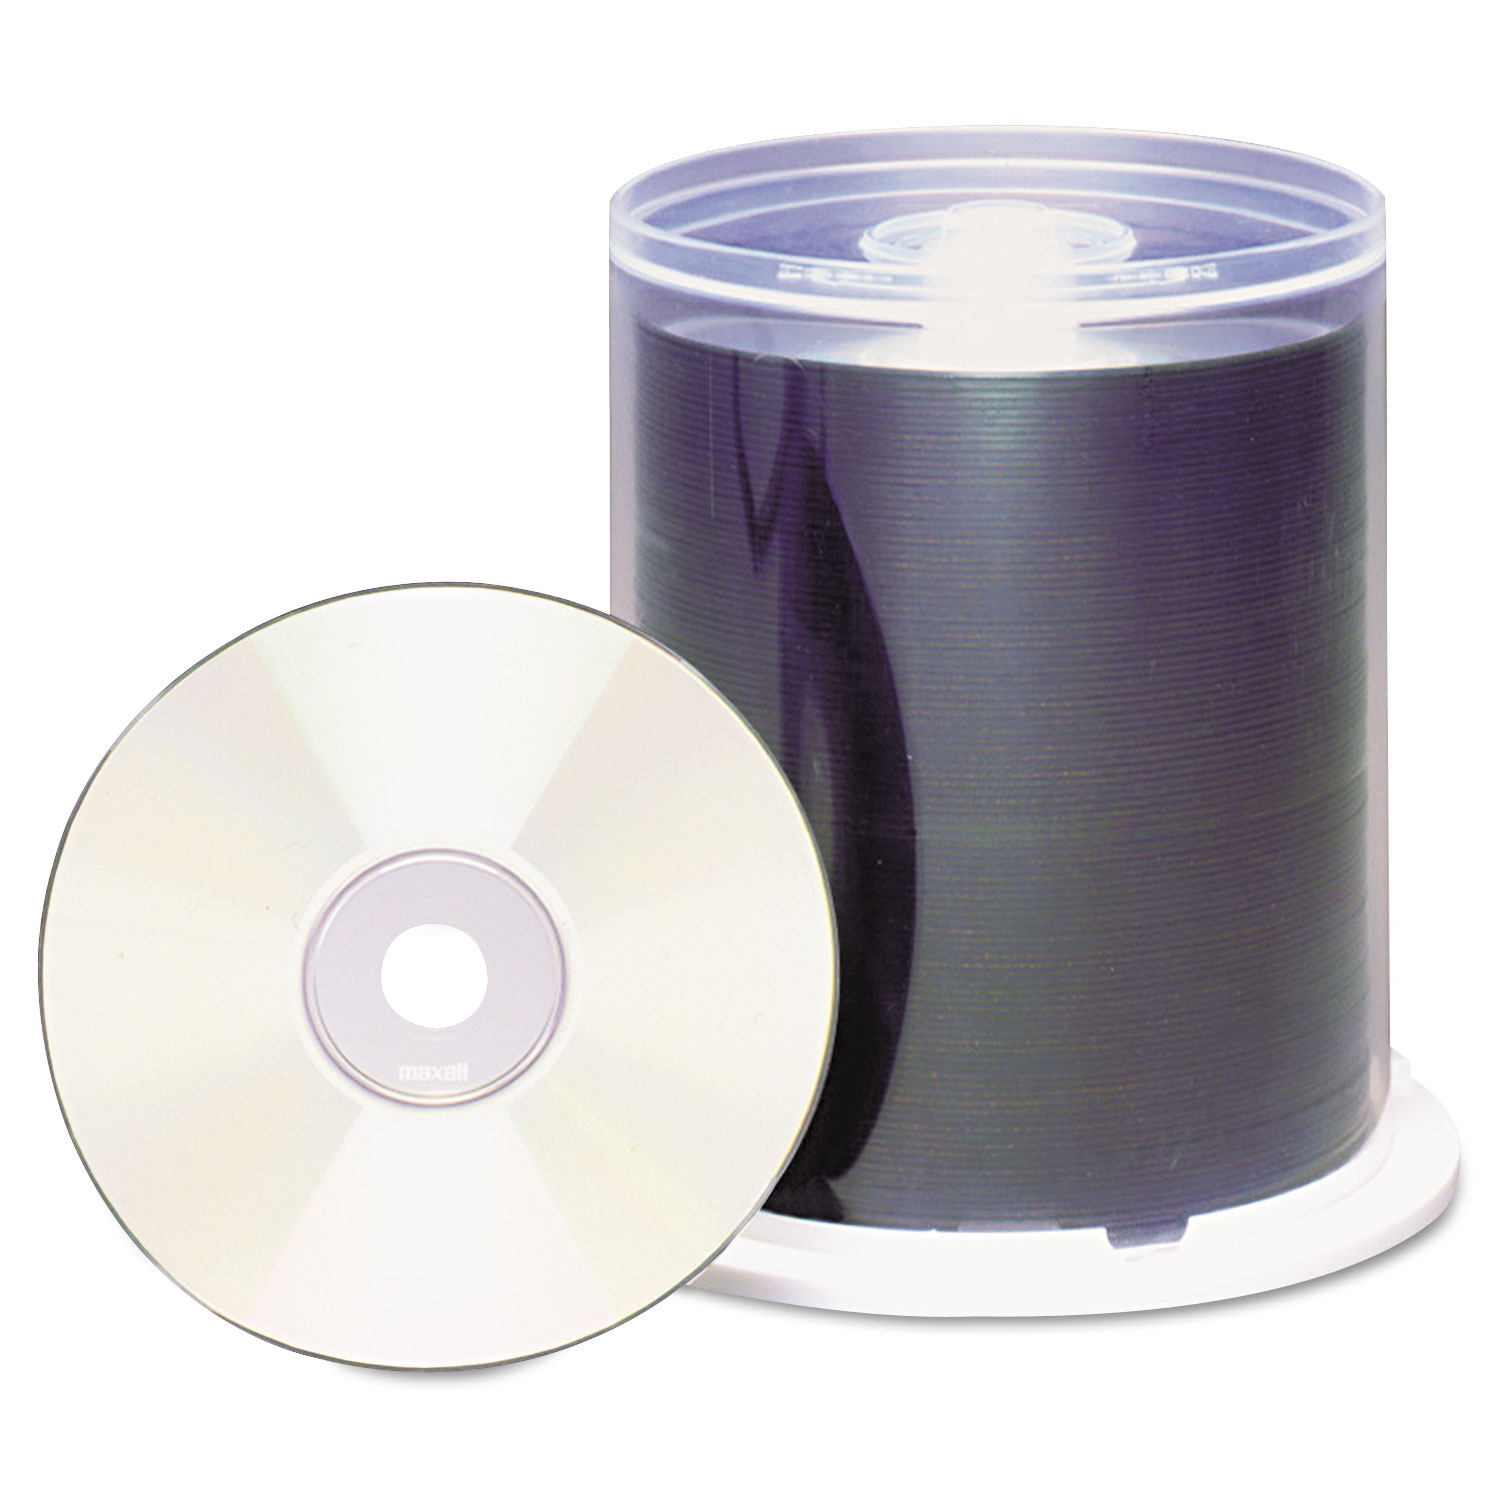 CD-R Discs, 700MB/80 min, 48x, Spindle, Printable Matte White, 100/Pack